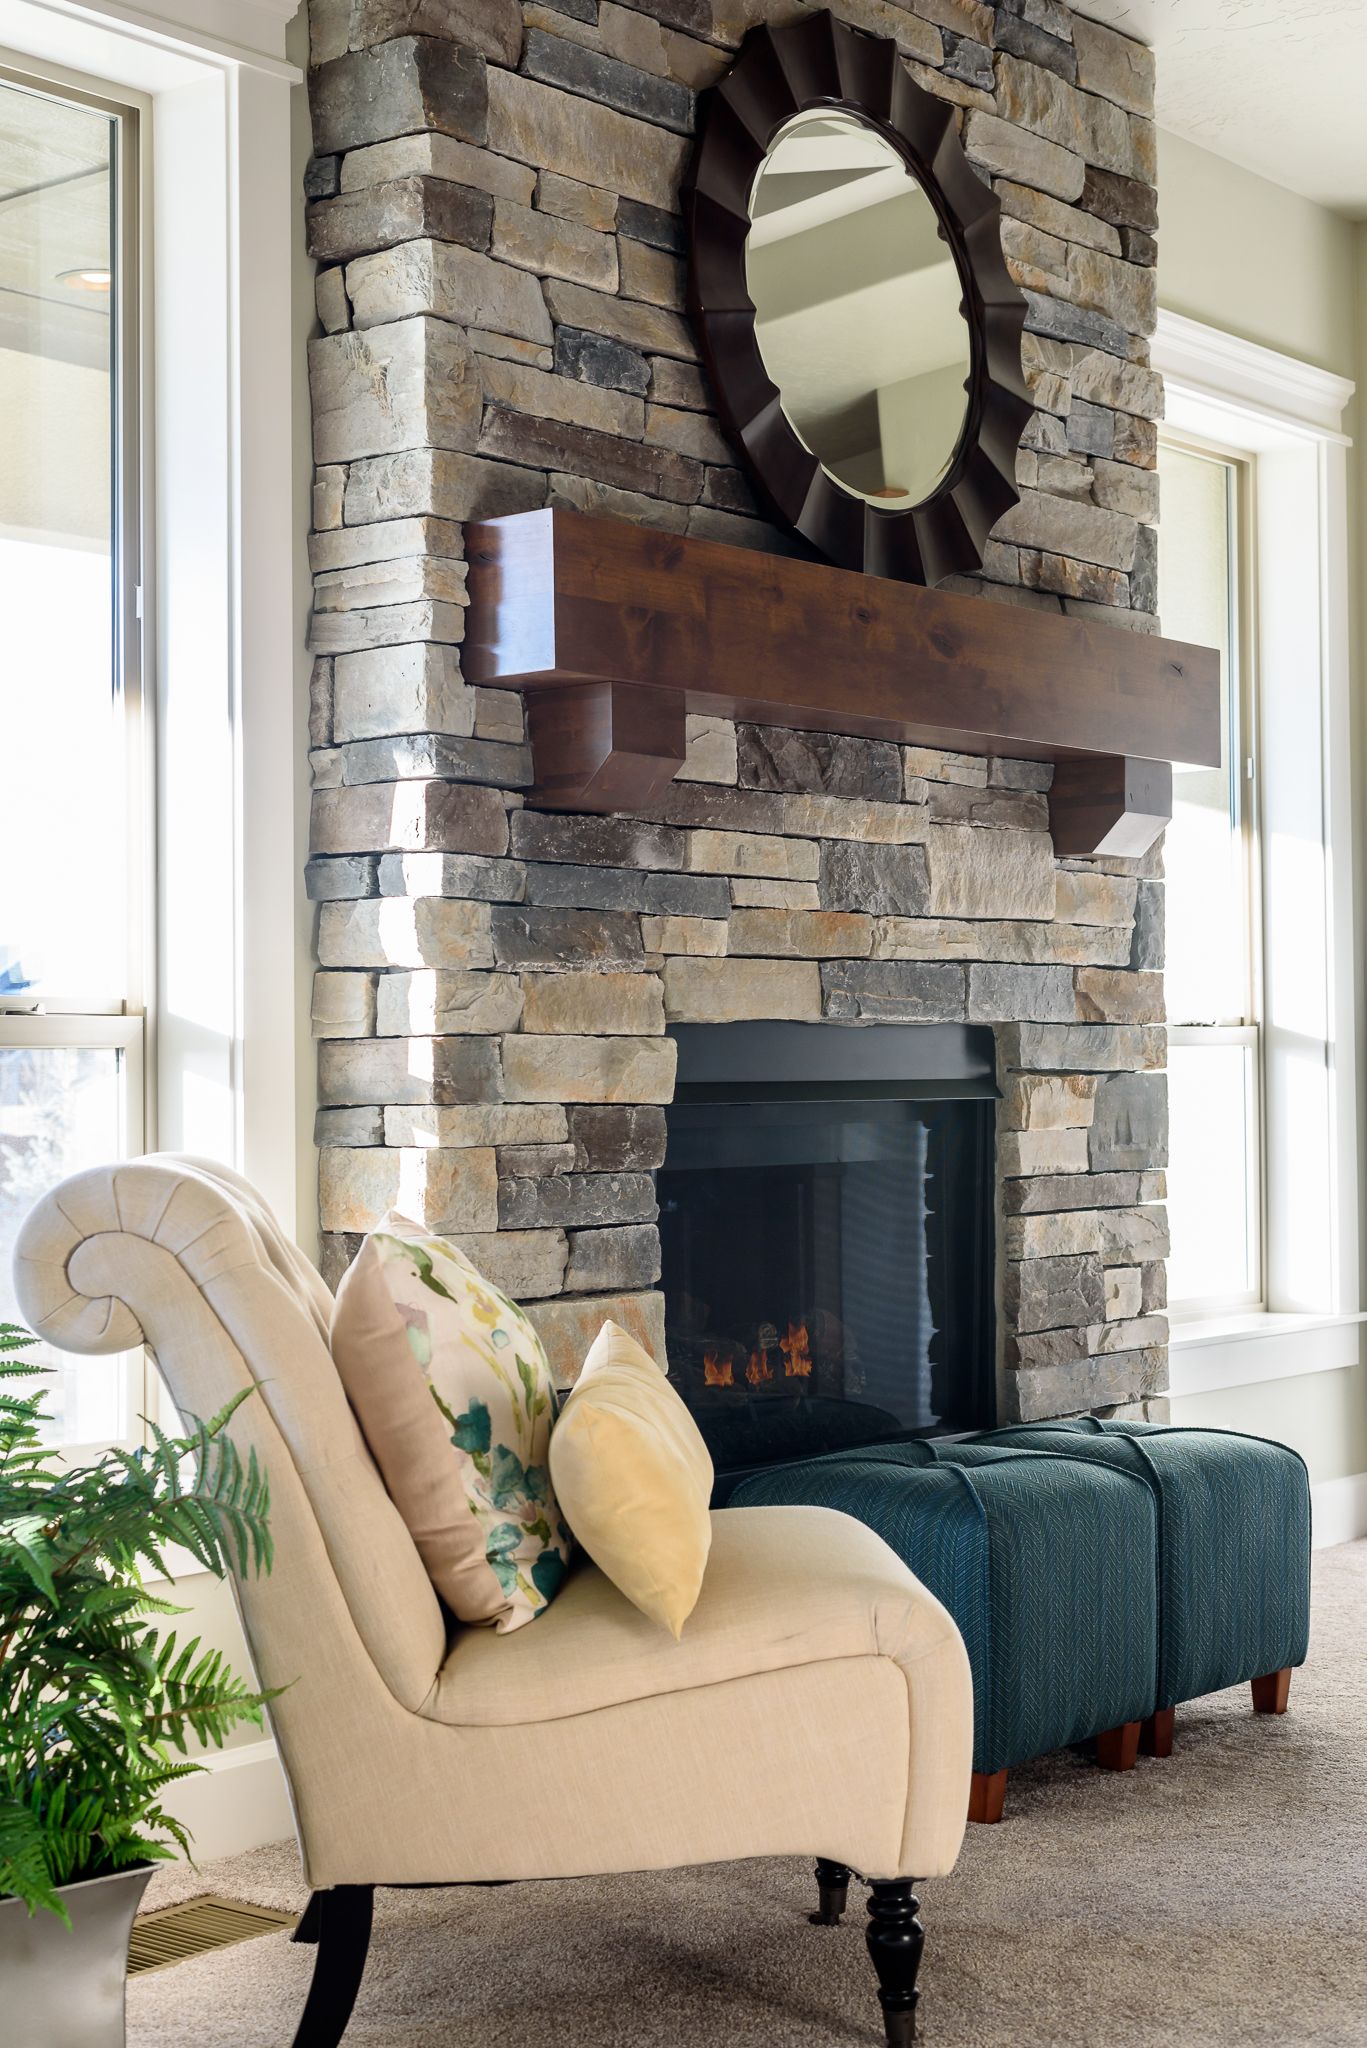 Mobile Fireplace Lovely Echo Ridge Country Ledgestone On This Floor to Ceiling Stone